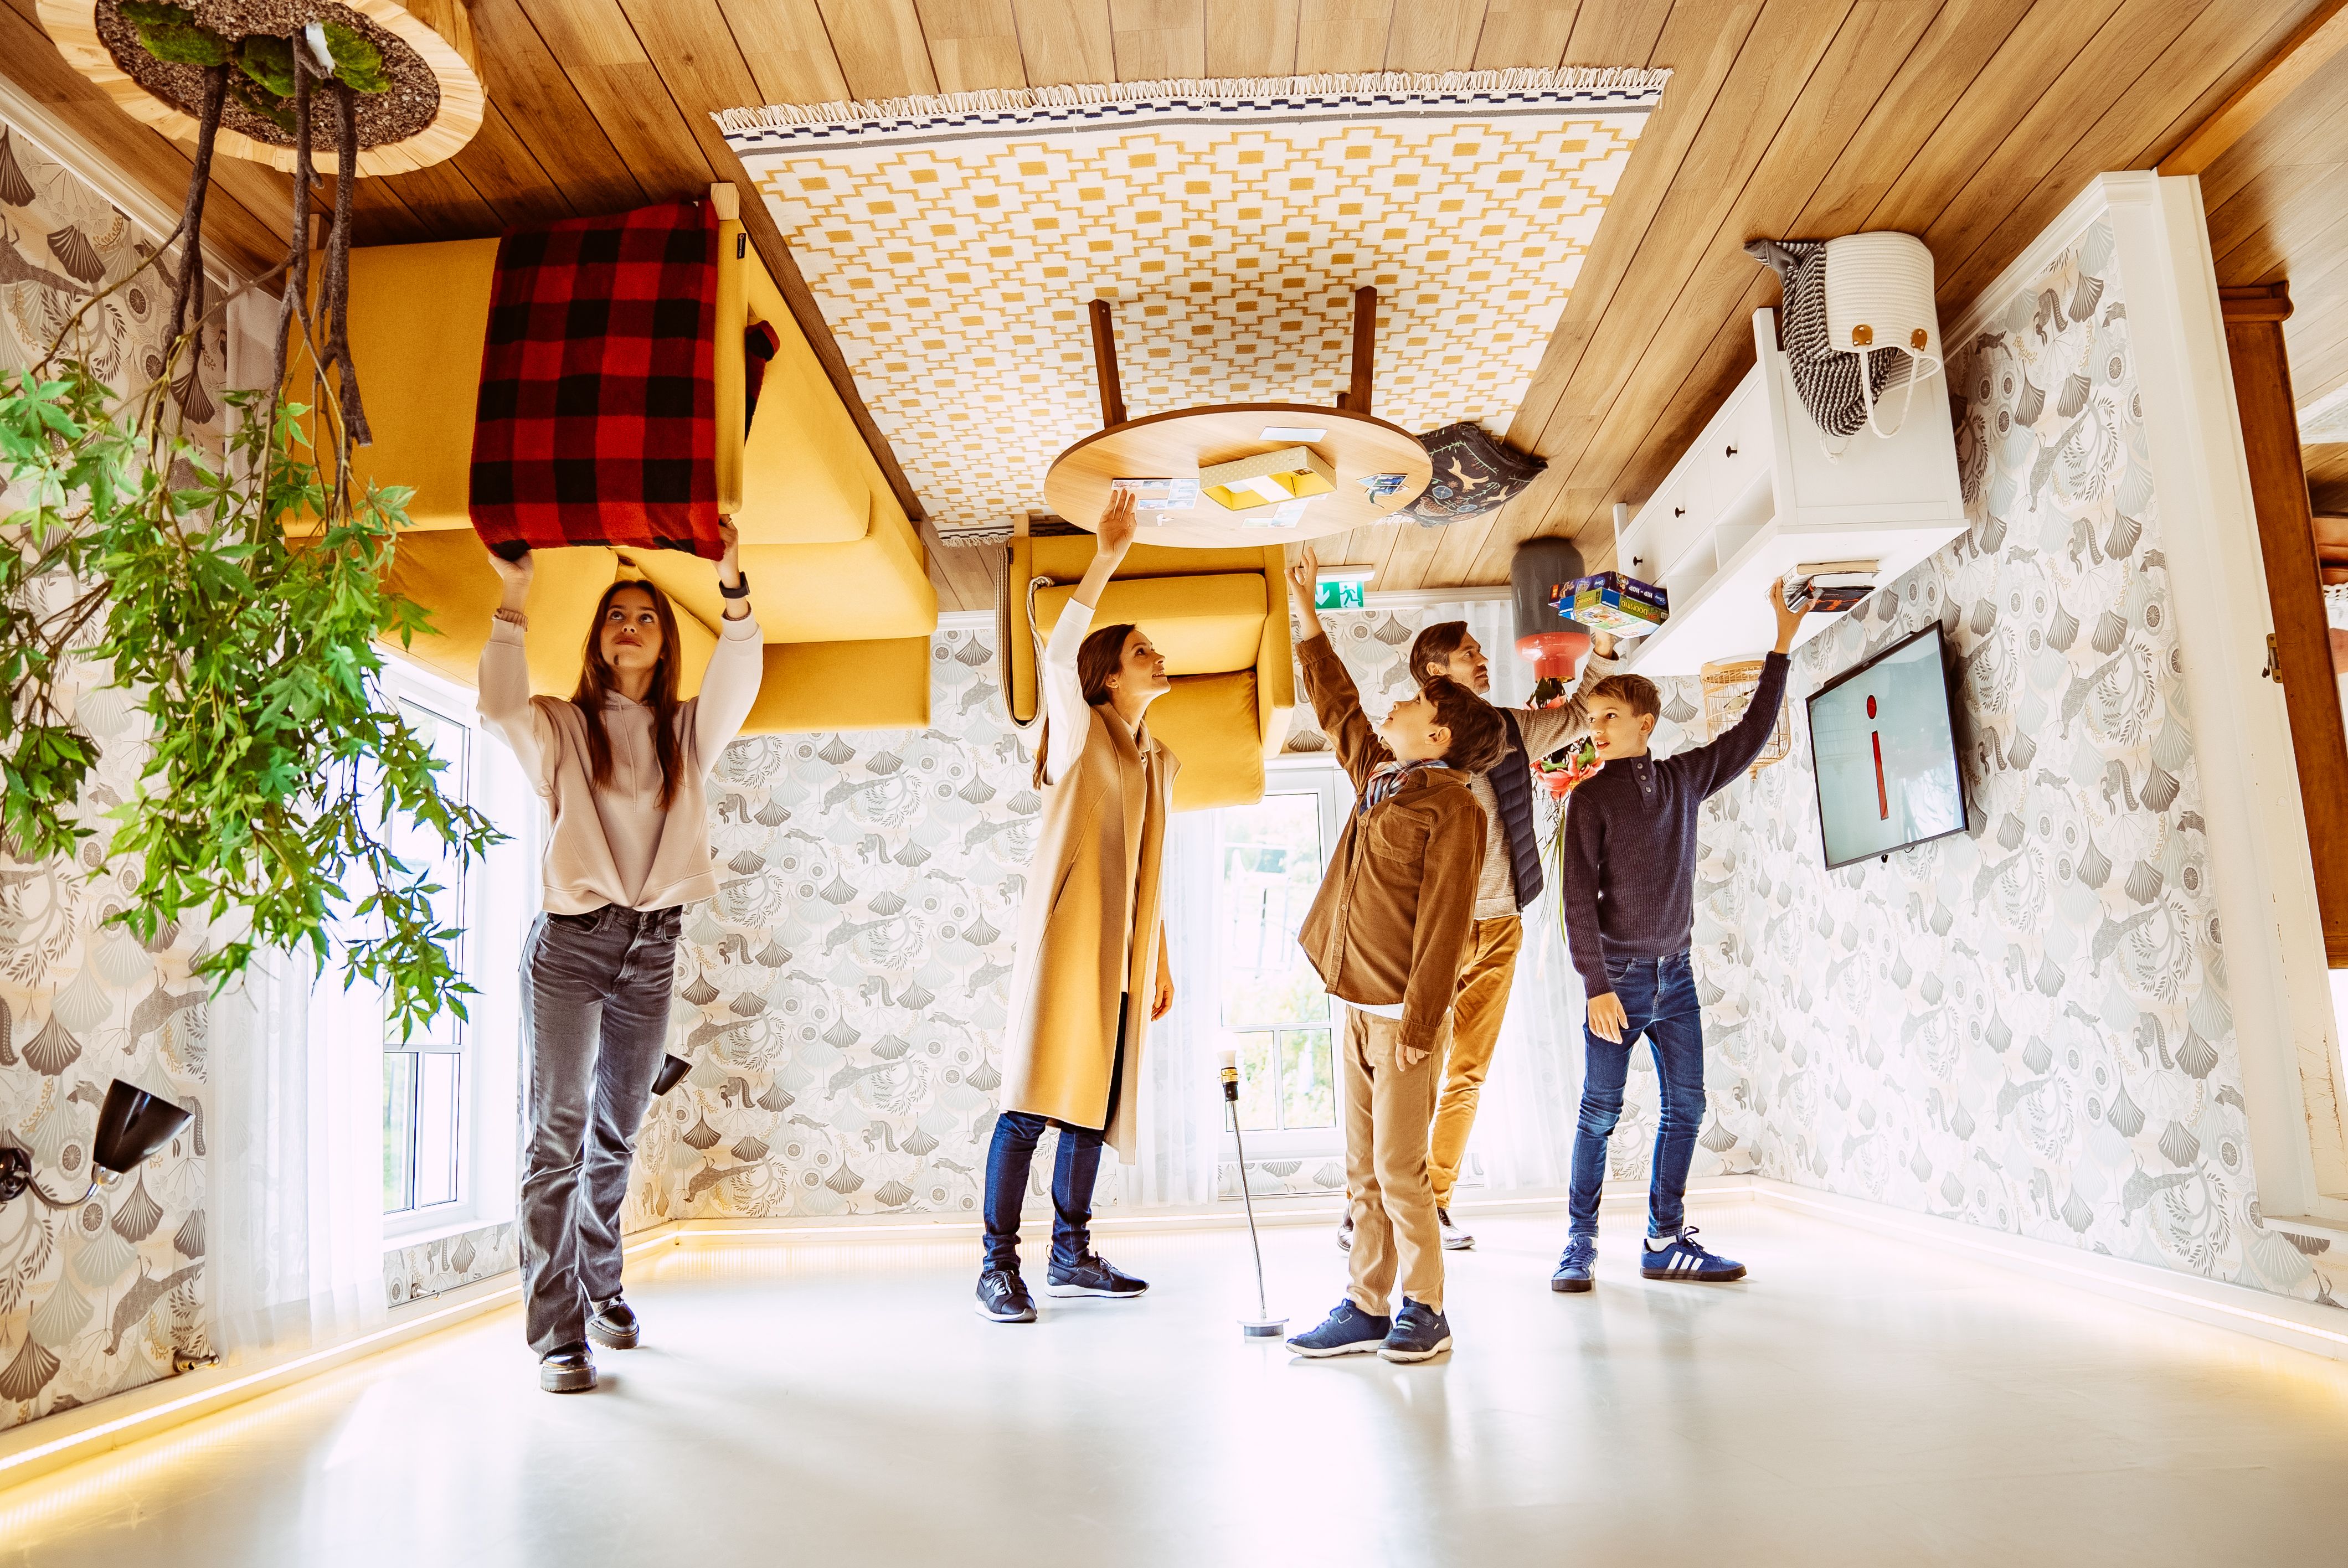 A family of five looking around inside the Upside Down House in Tartu